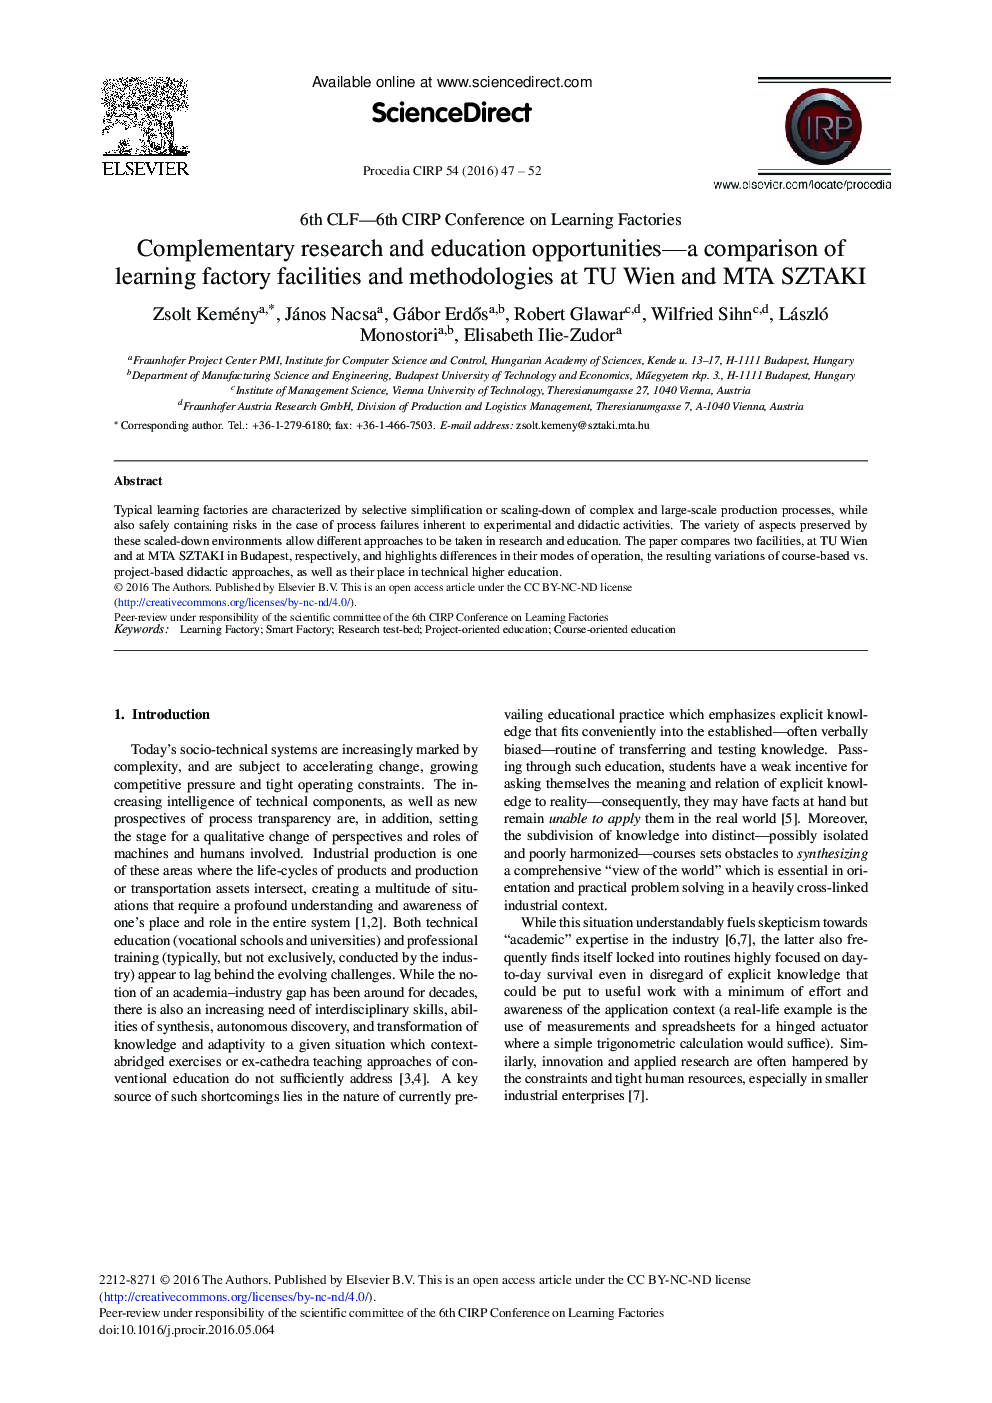 Complementary Research and Education Opportunities-A Comparison of Learning Factory Facilities and Methodologies at TU Wien and MTA SZTAKI